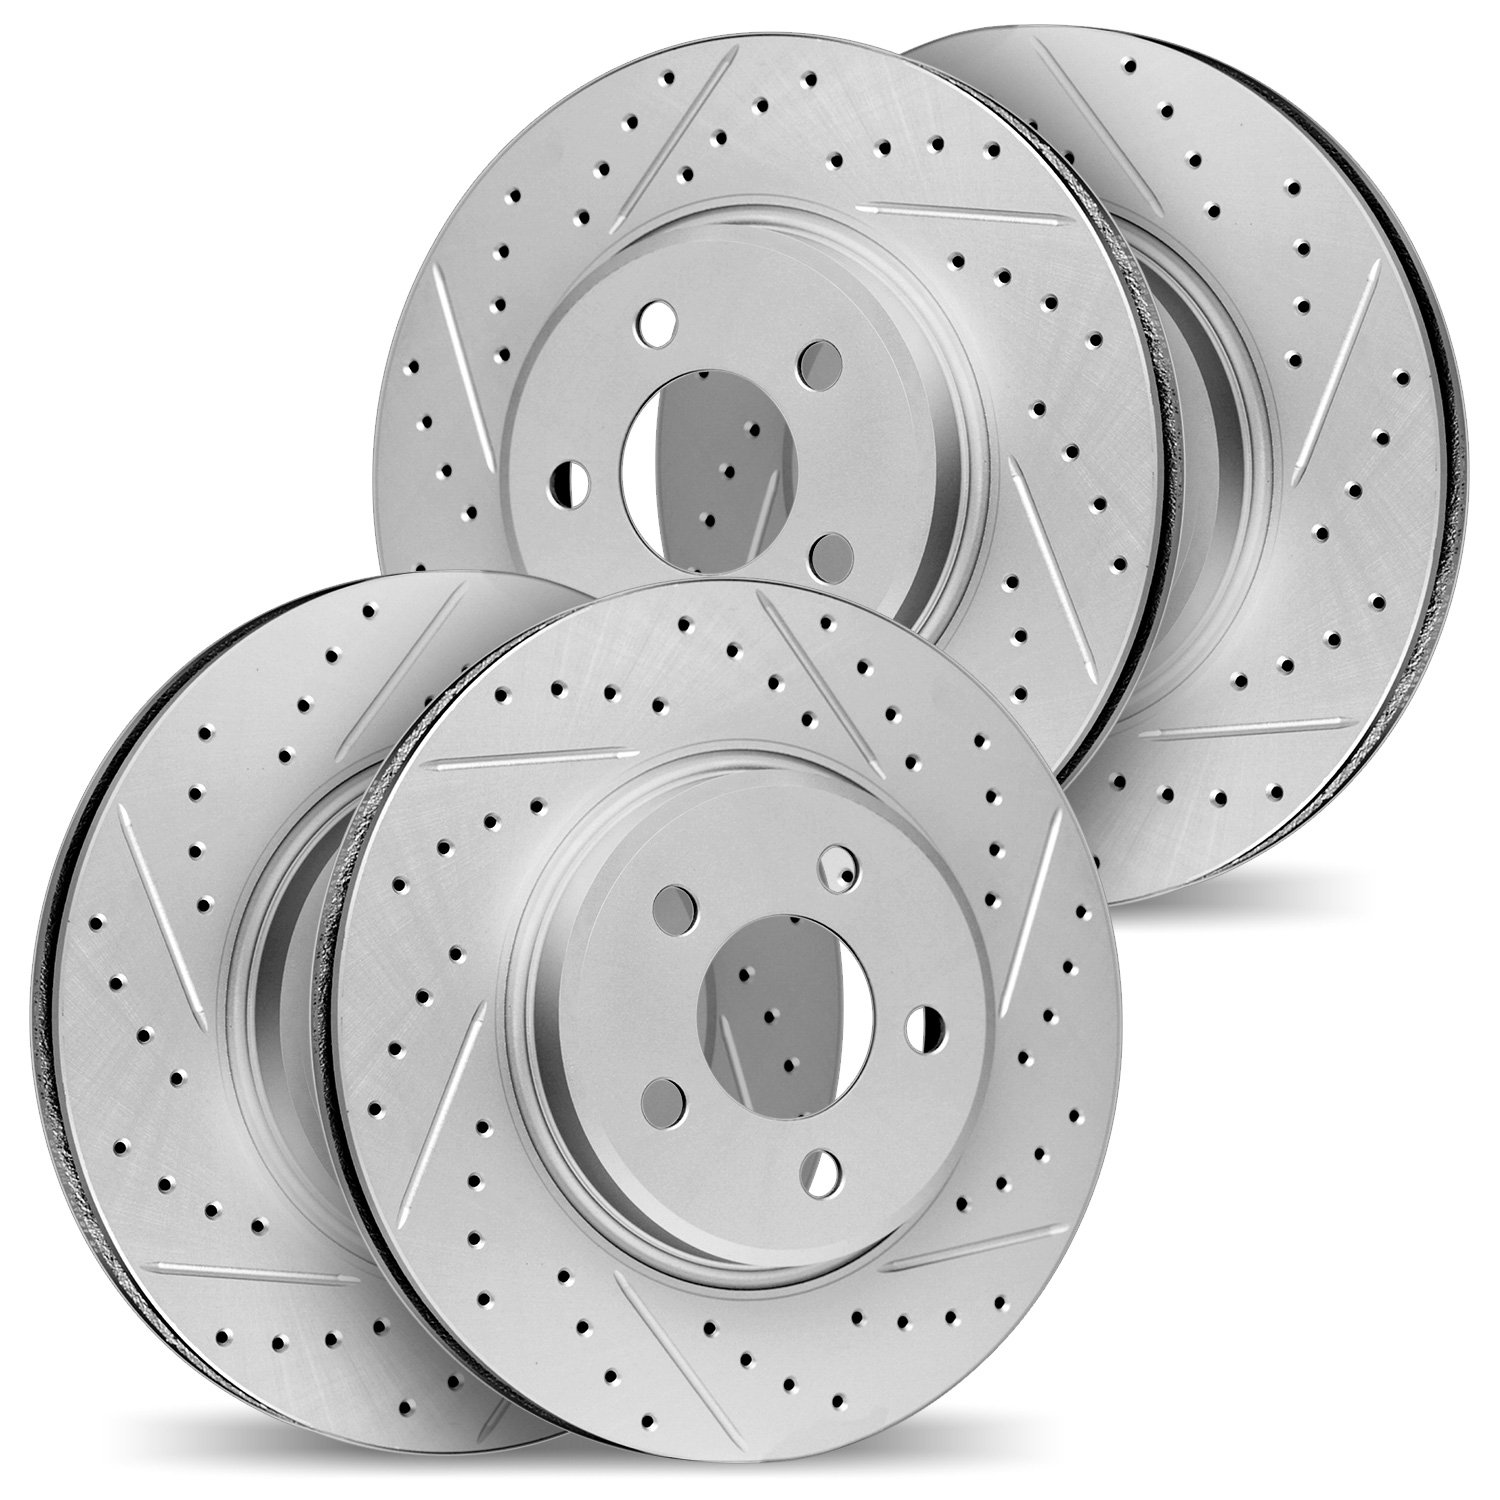 2004-56002 Geoperformance Drilled/Slotted Brake Rotors, 2003-2011 Ford/Lincoln/Mercury/Mazda, Position: Front and Rear